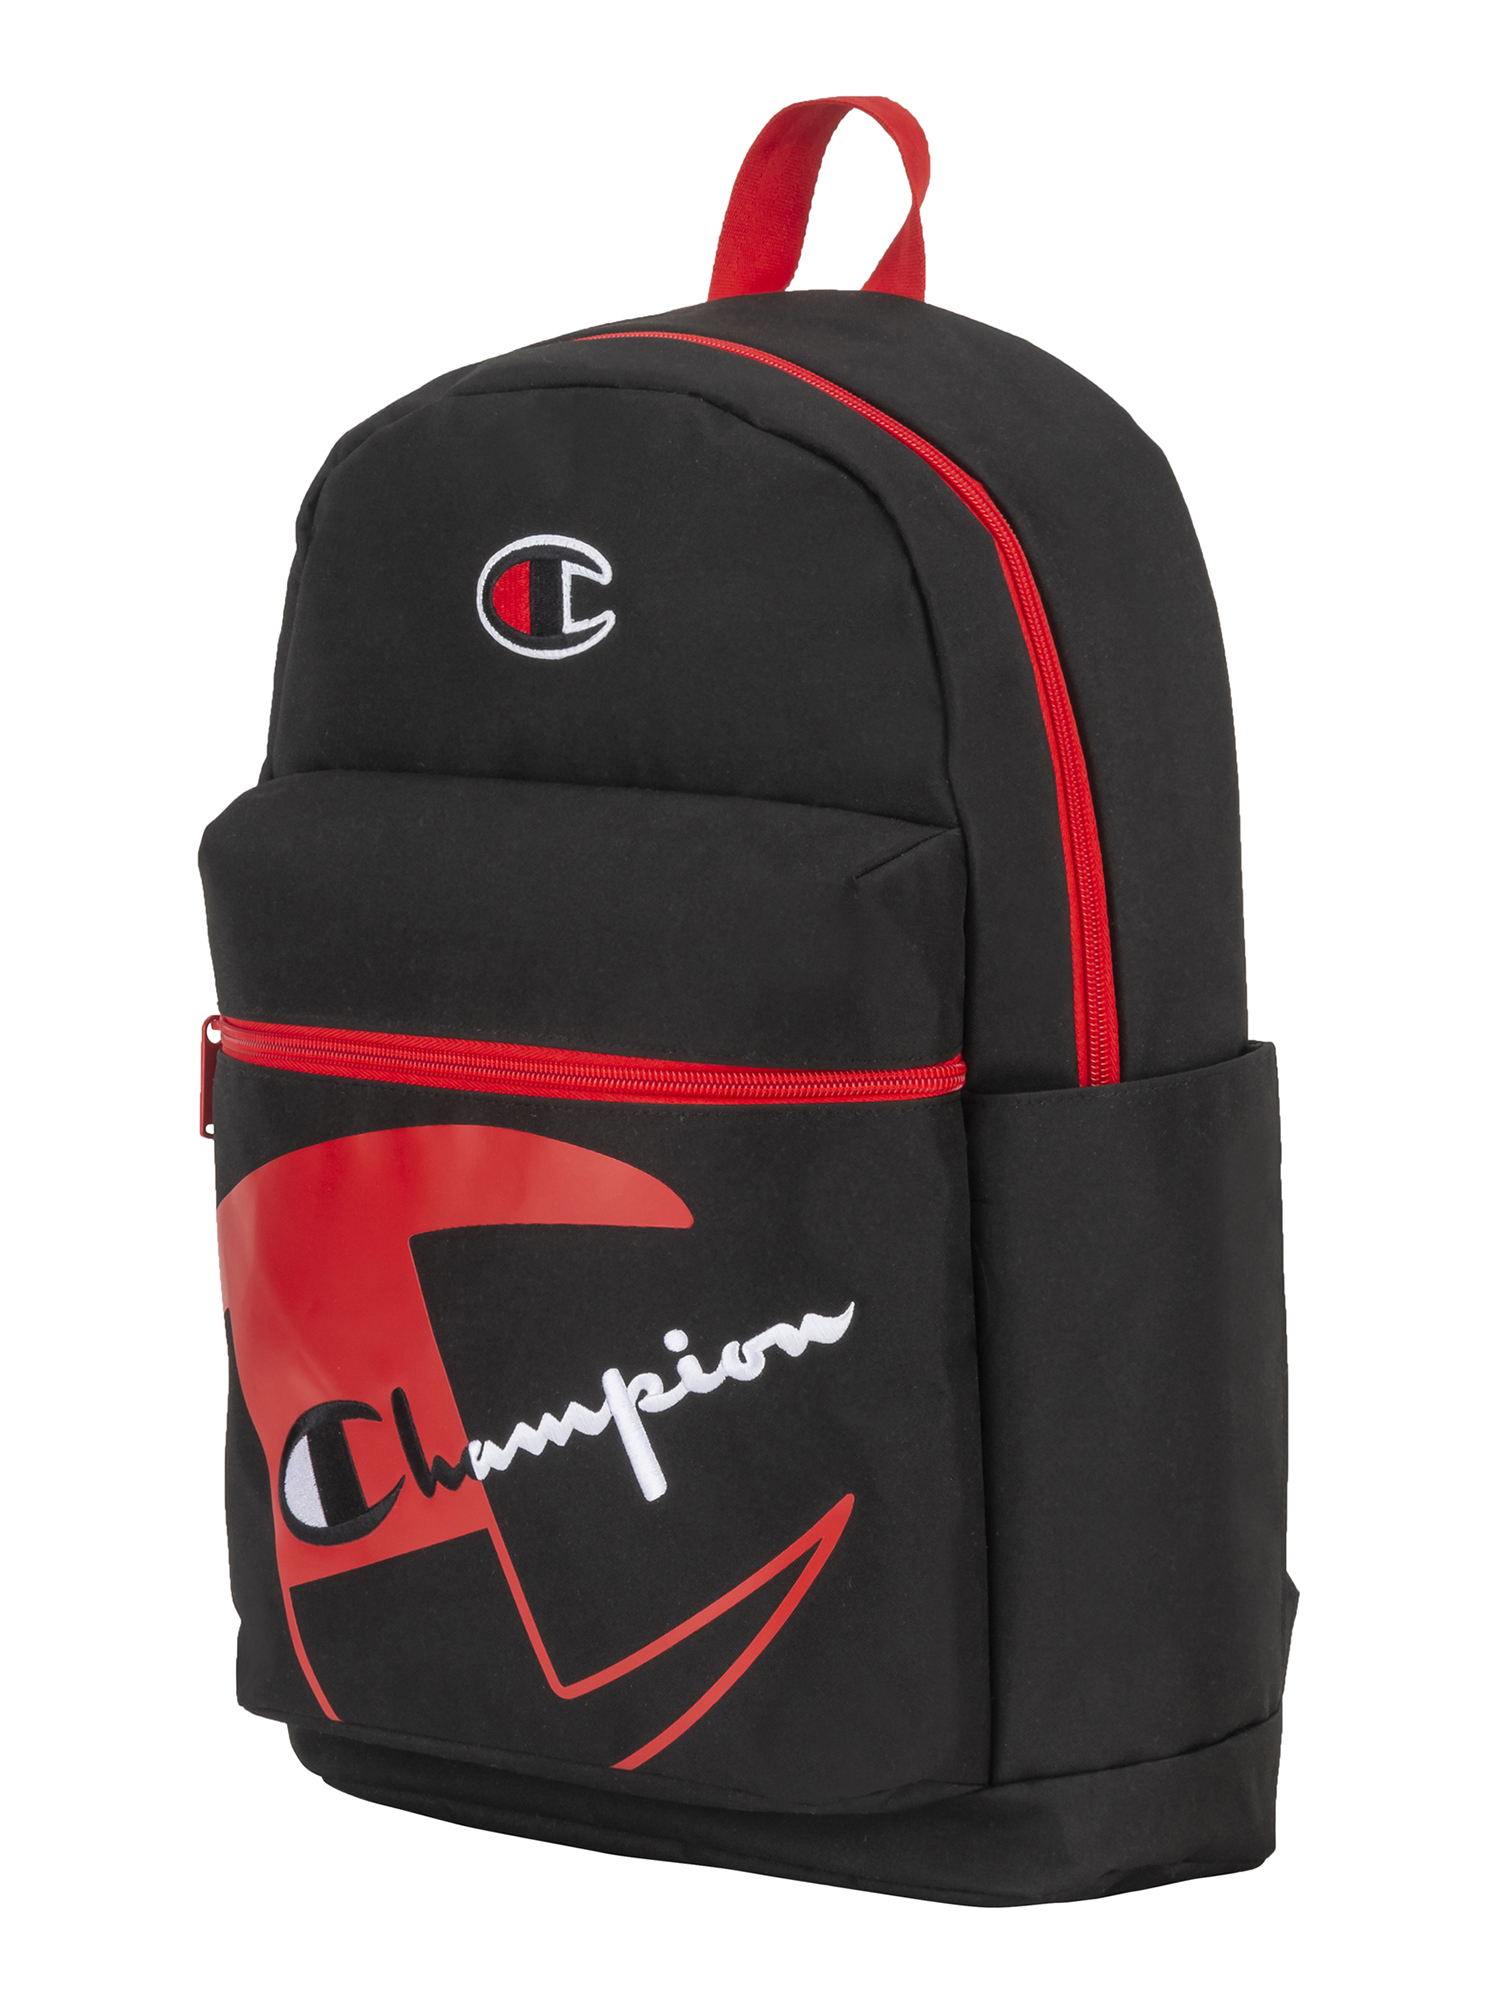 Champion Youth Supercize Backpack - image 2 of 4